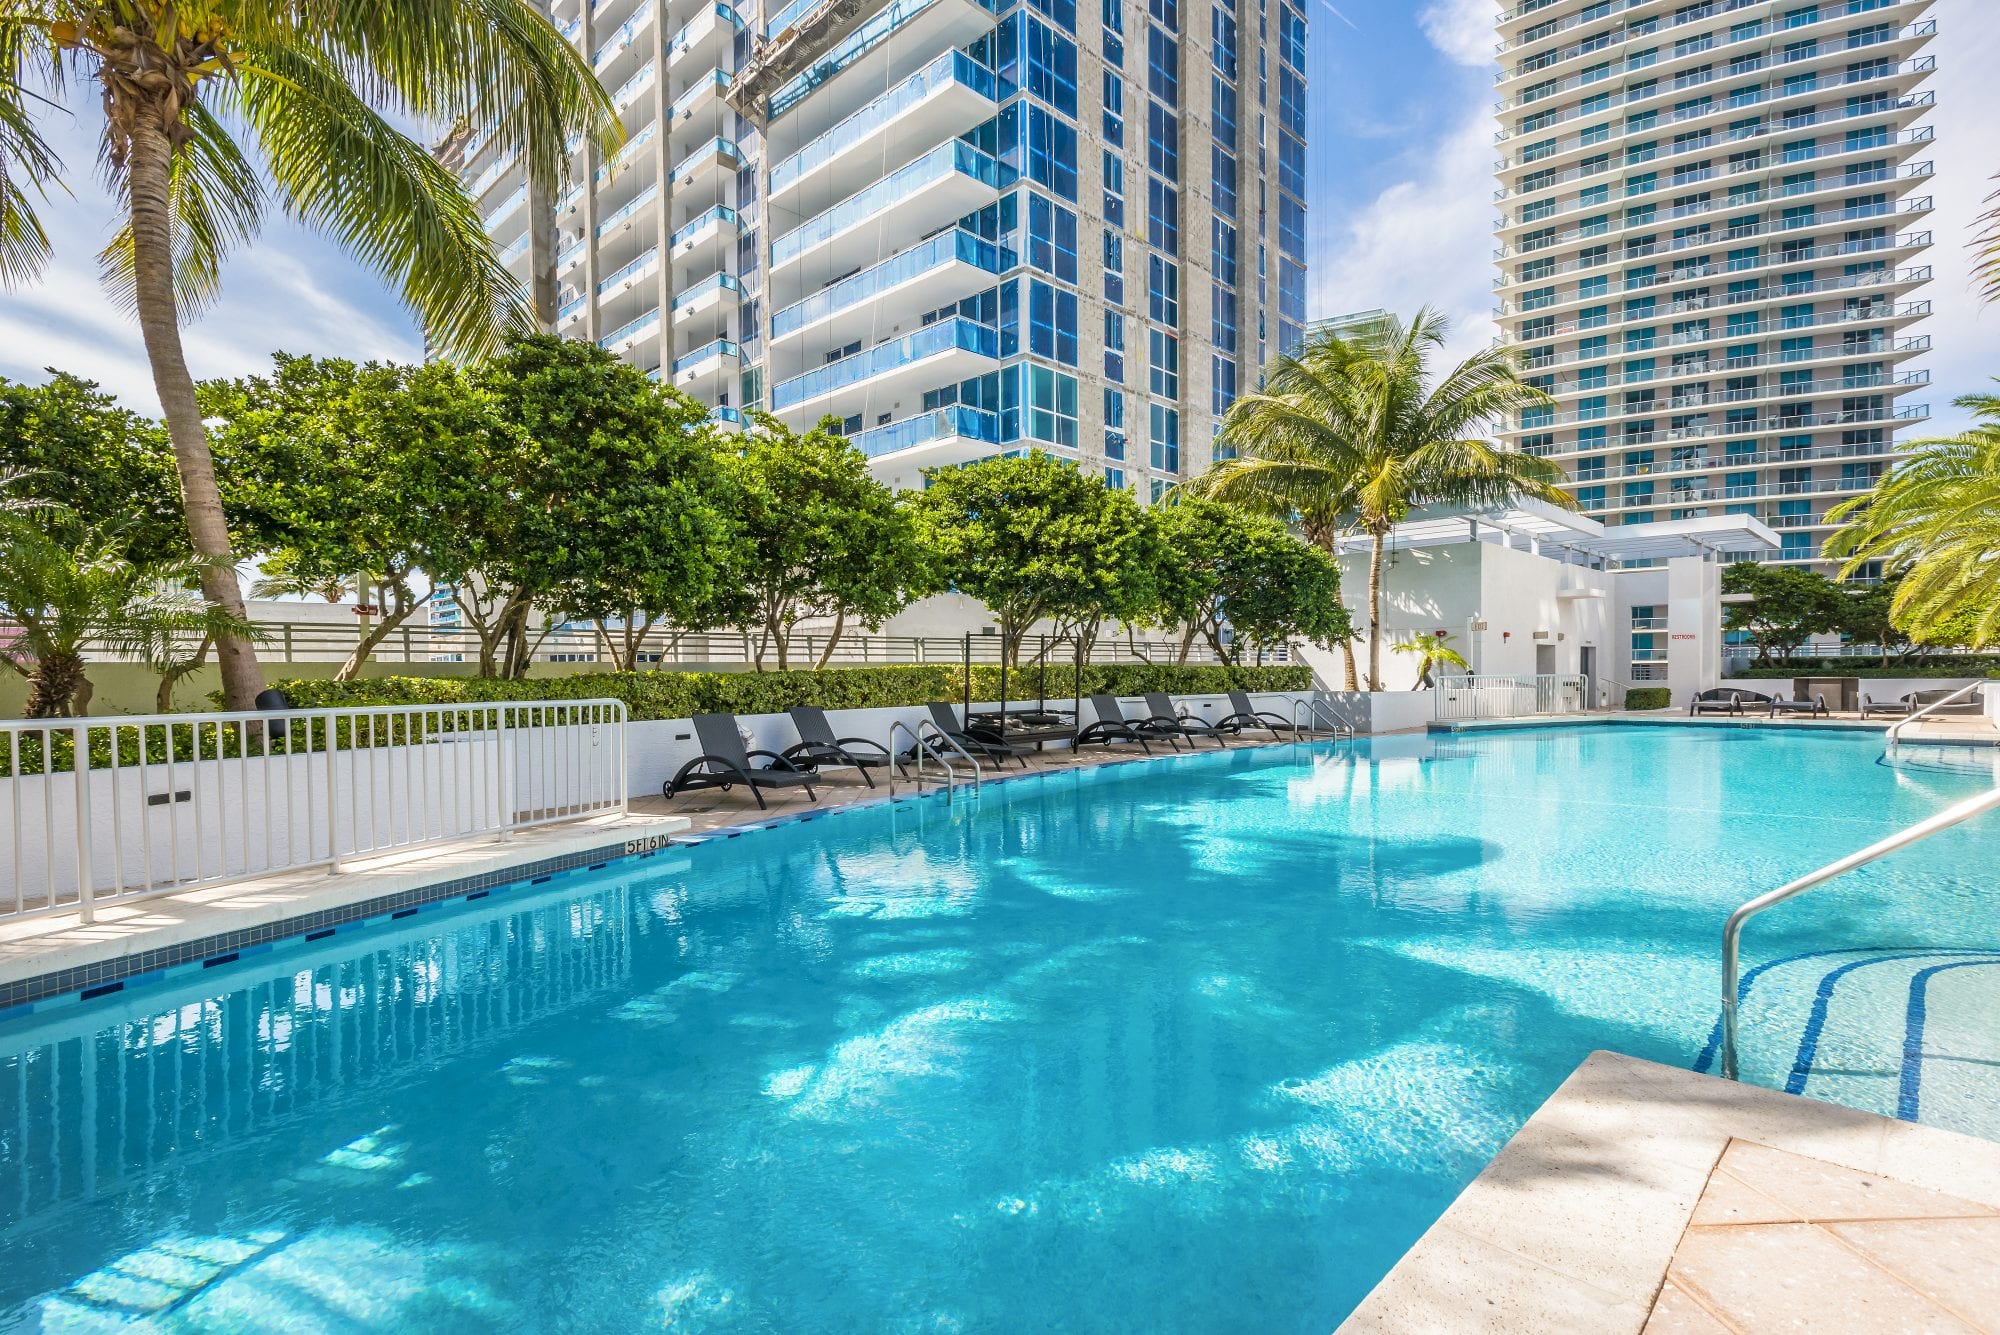 Two Bedroom at 1060 Brickell for Lease | Sea Grove Realty